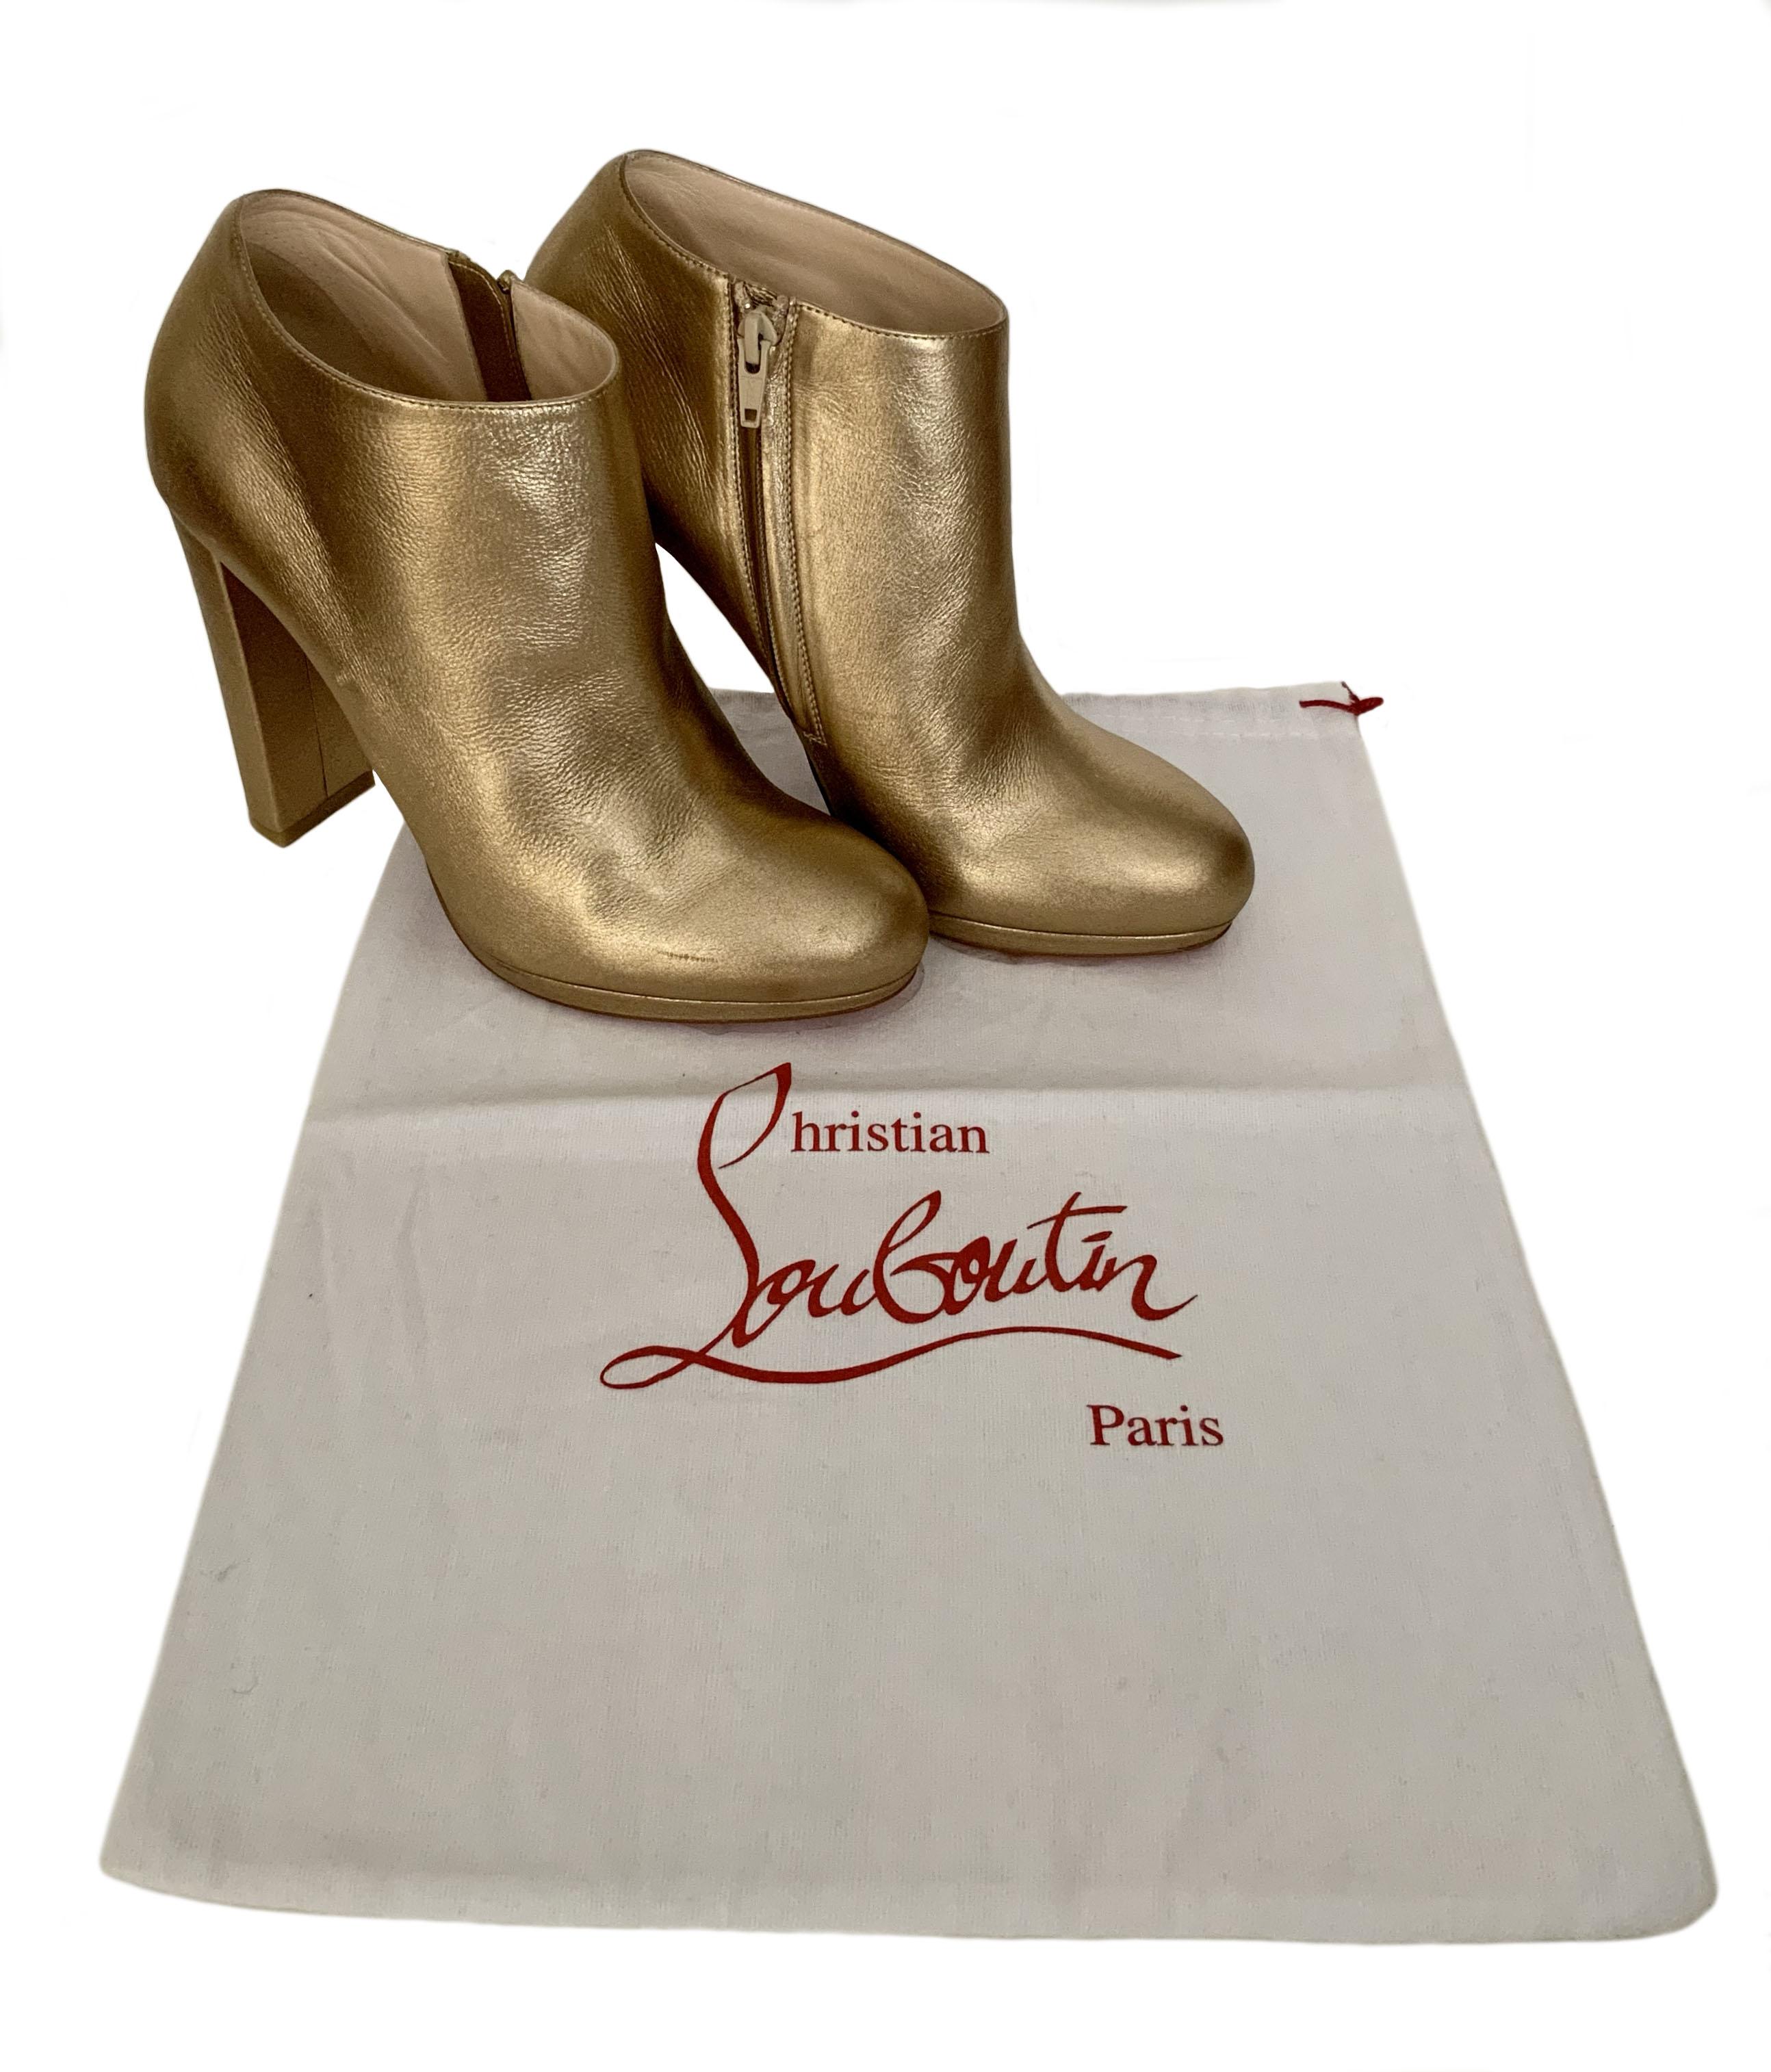 These chic and elegant Christian Louboutin Rock Ankle Boots are crafted in metallic gold textured leather.
They feature a covered block heel, a round shaped toe and a hidden side zipper. The signature red glossy sole completes the look. 

Material: